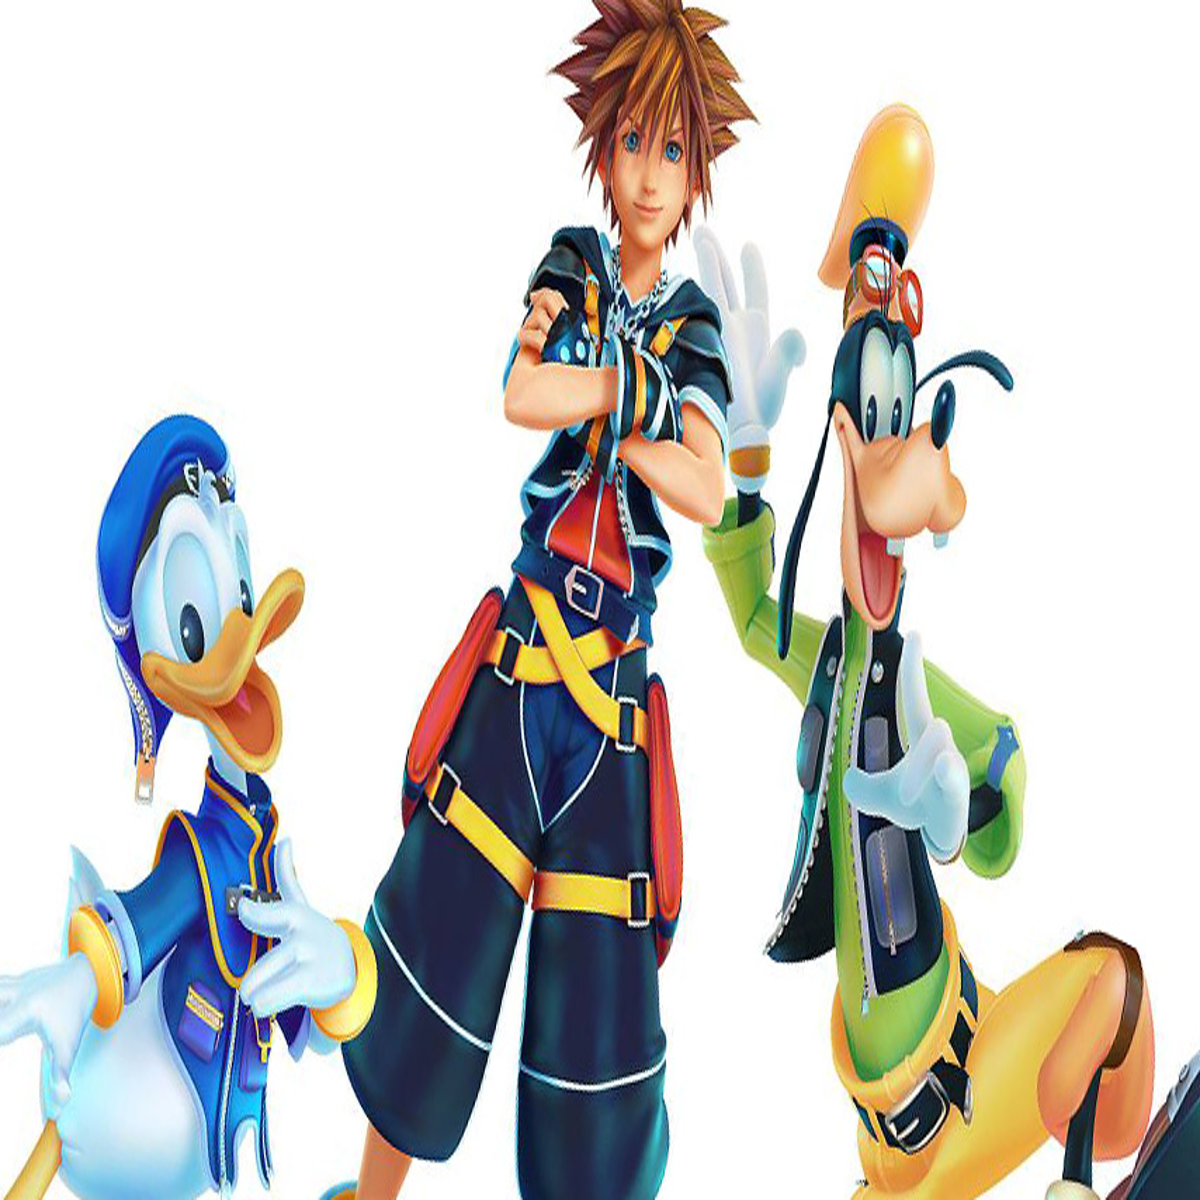 Will the PS4 Get a Kingdom Hearts Remastered Series? - IGN Access